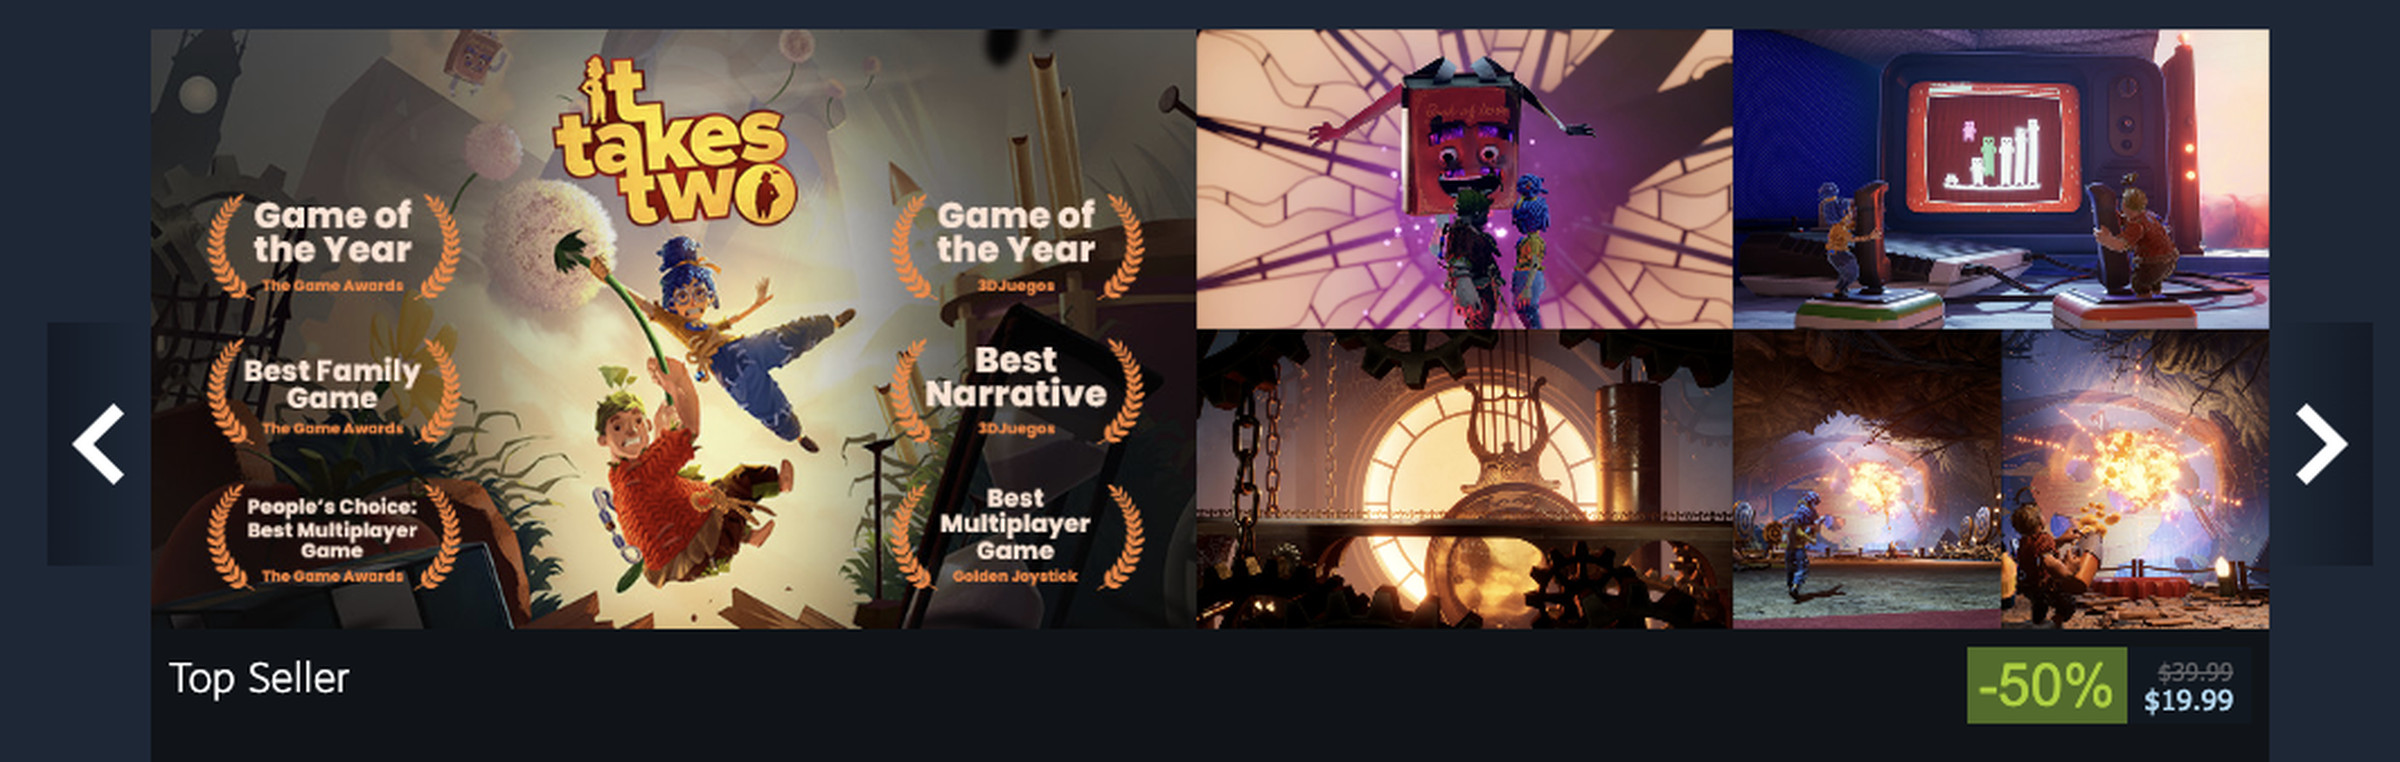 These awards will need to be removed from the It Takes Two image.